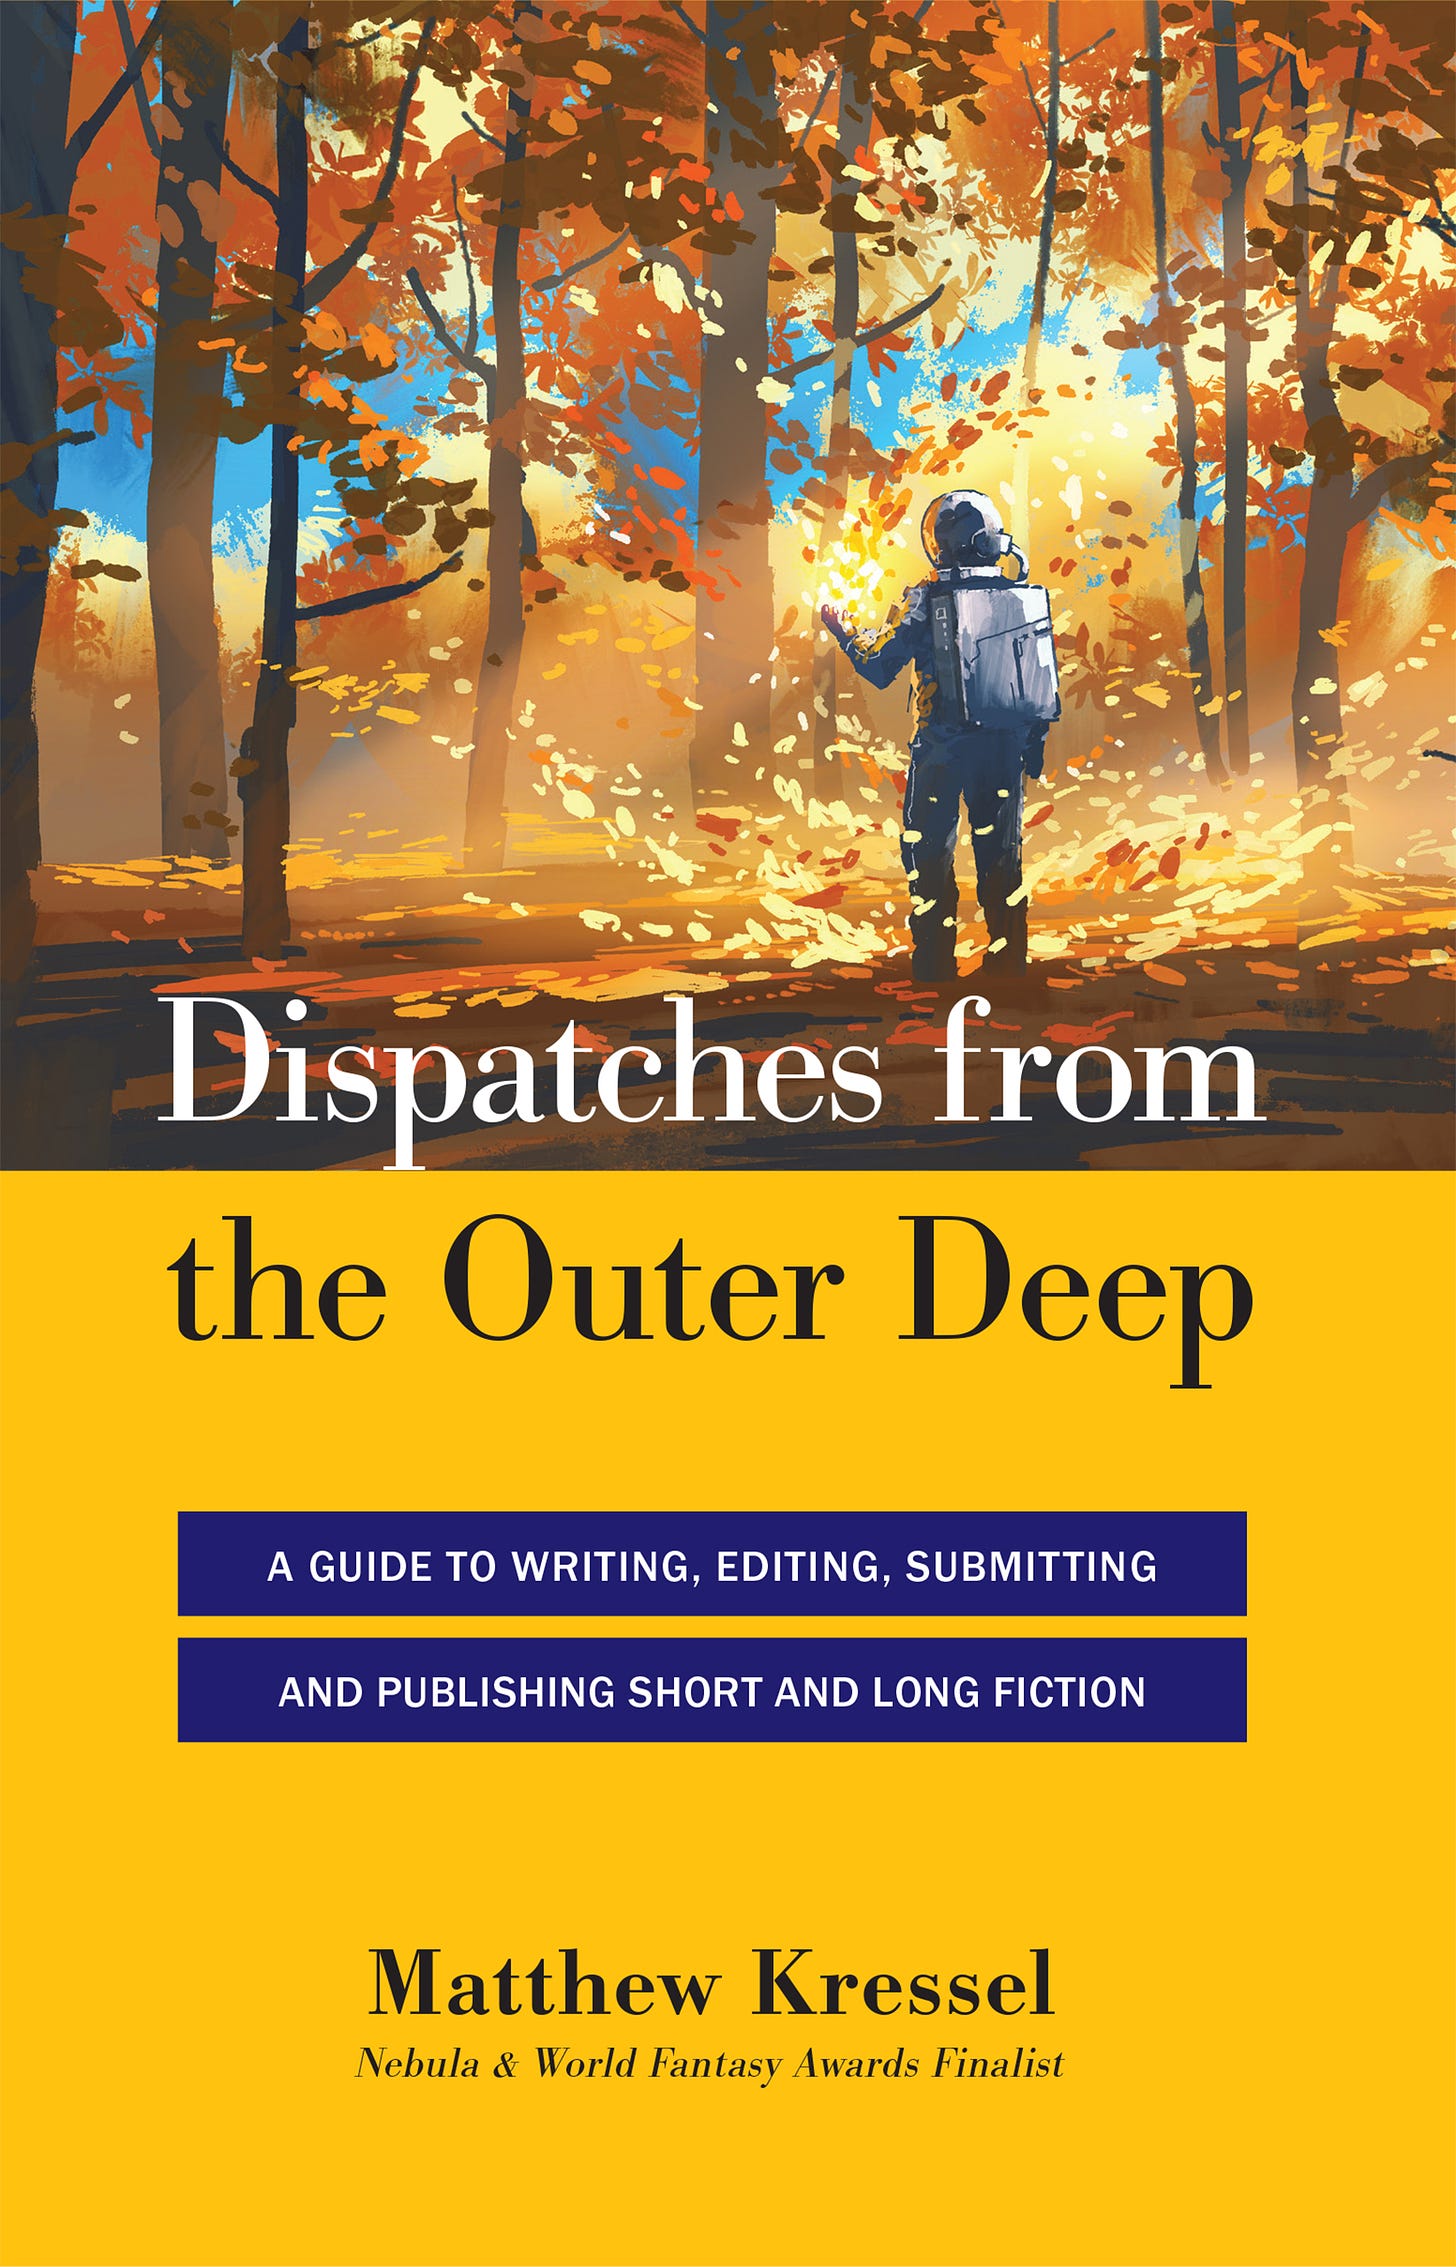 Dispatches from the Outer Deep: A Guide to Writing, Editing, Submitting, and Publishing Long and Short Fiction. A figure in a spacesuit walks into an autumn forest. There is something glowing in their hand.